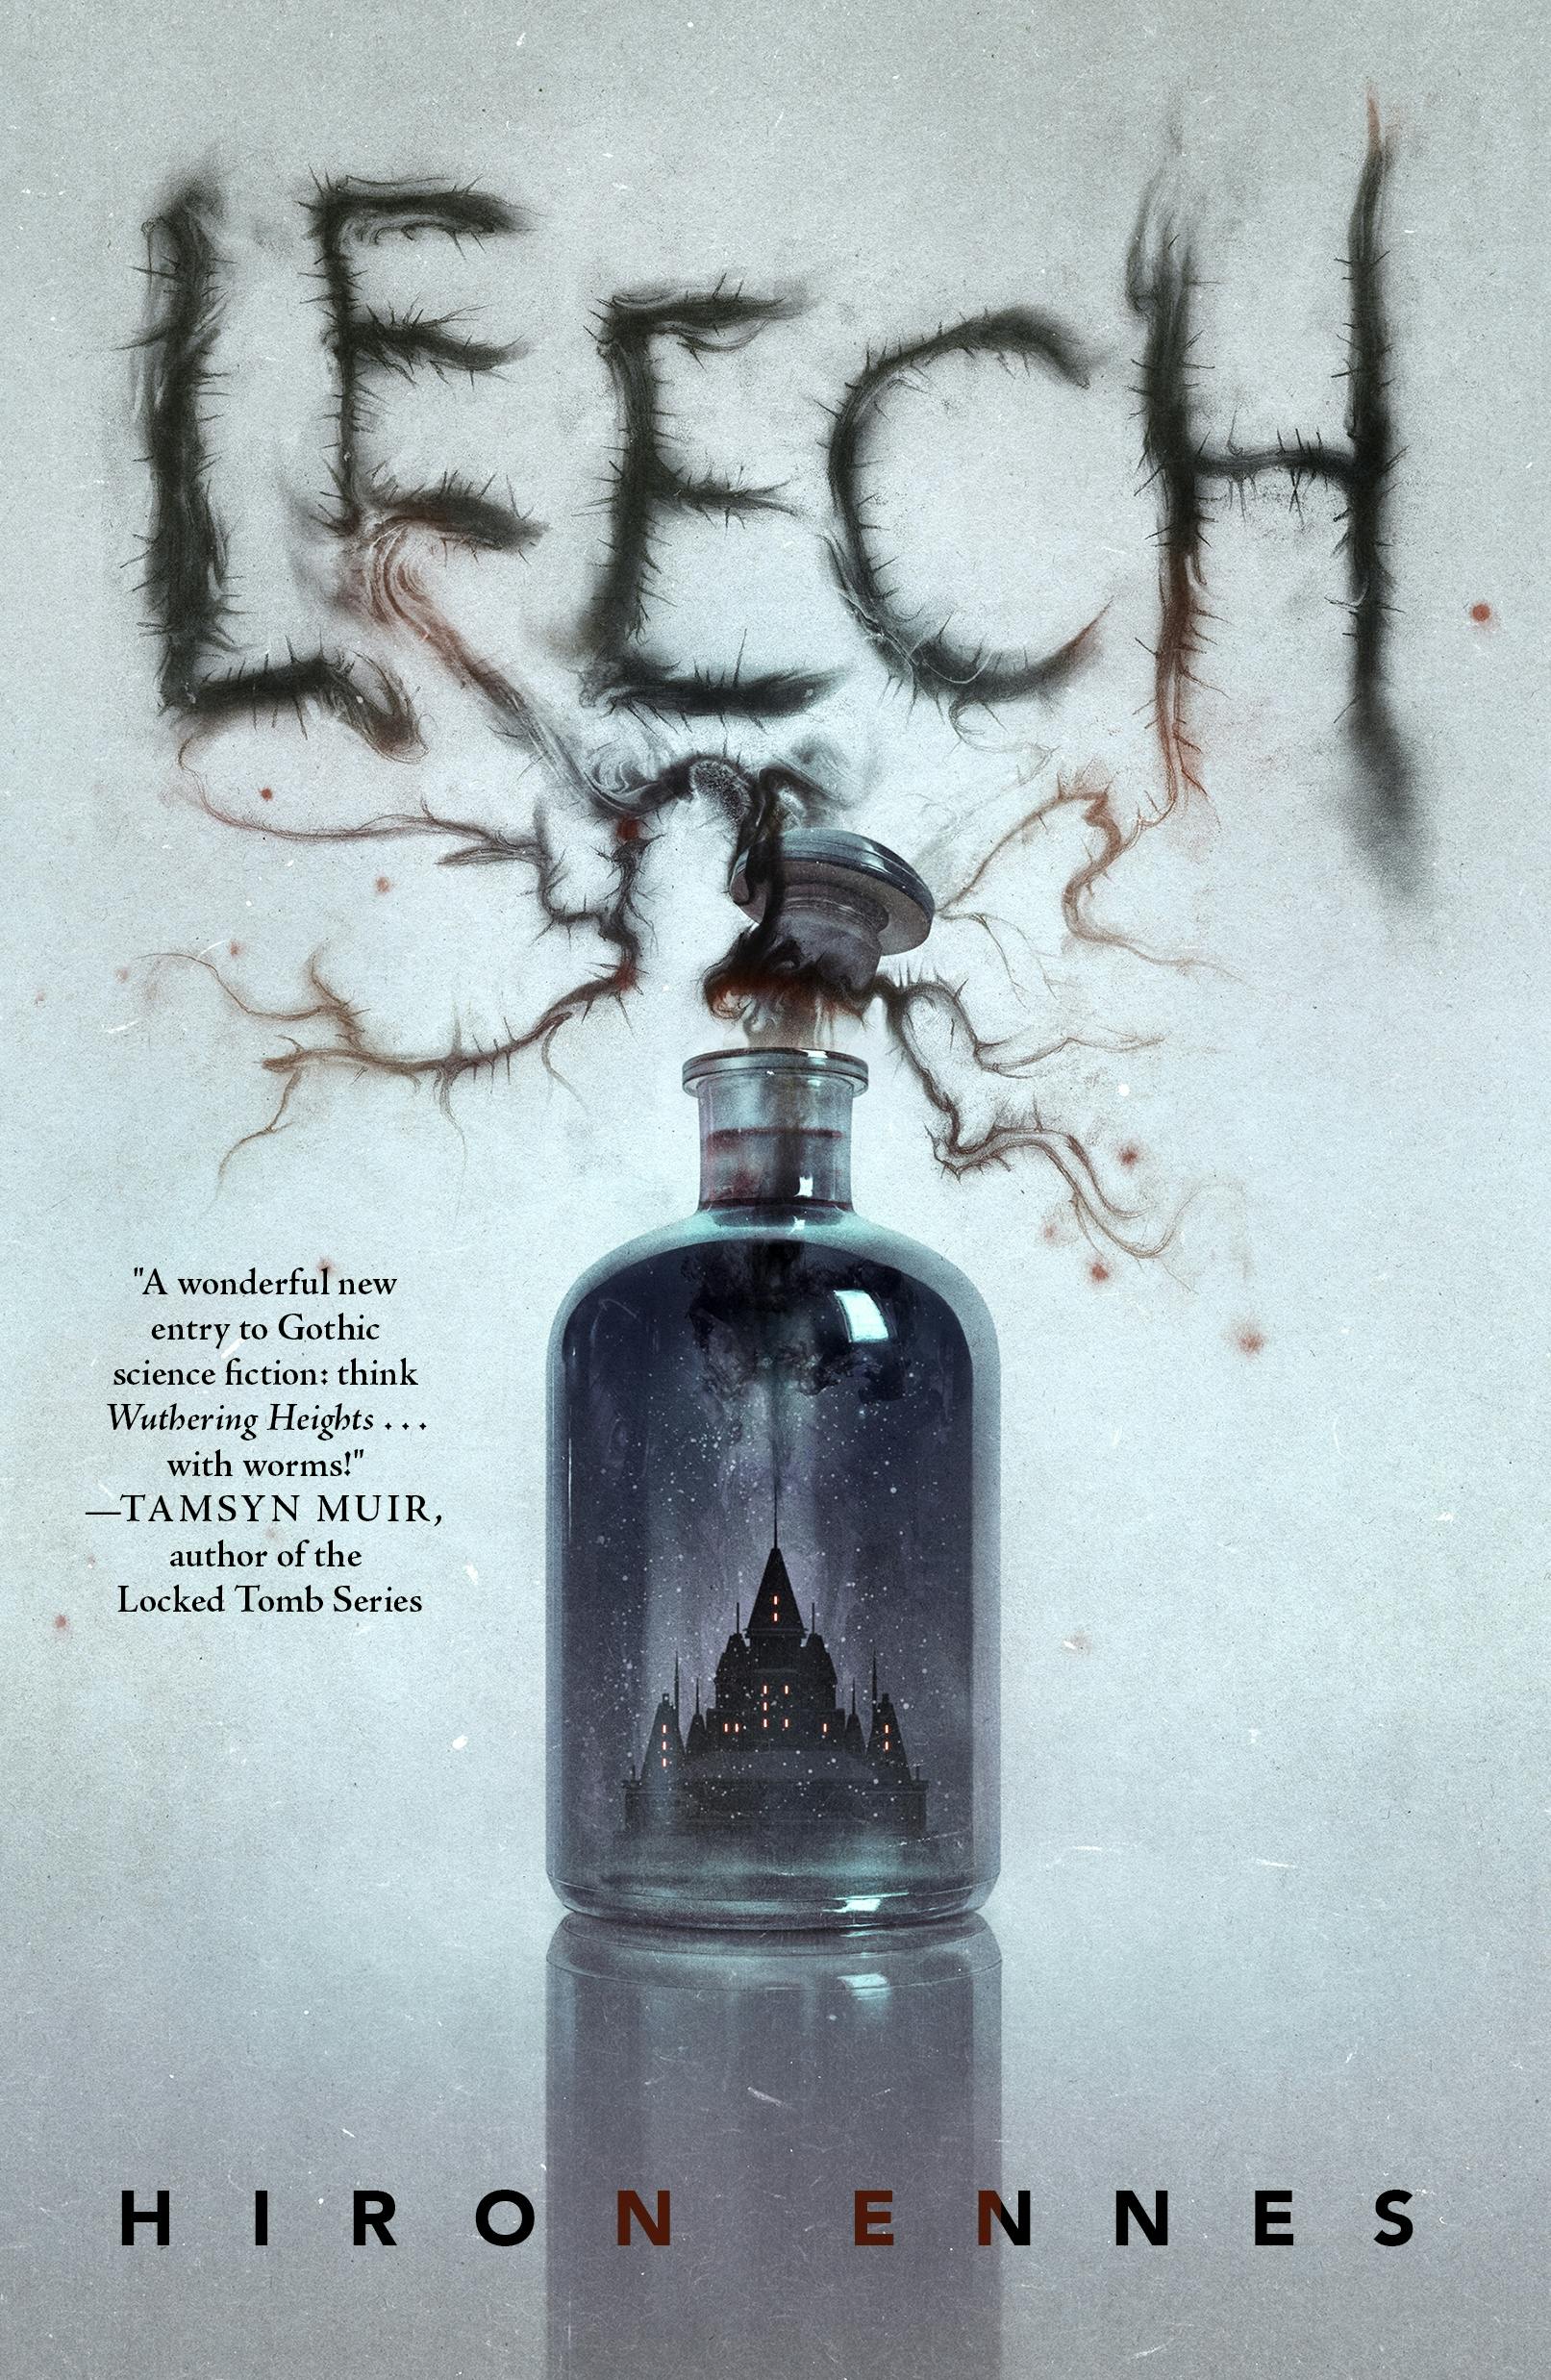 Cover for the book titled as: Leech